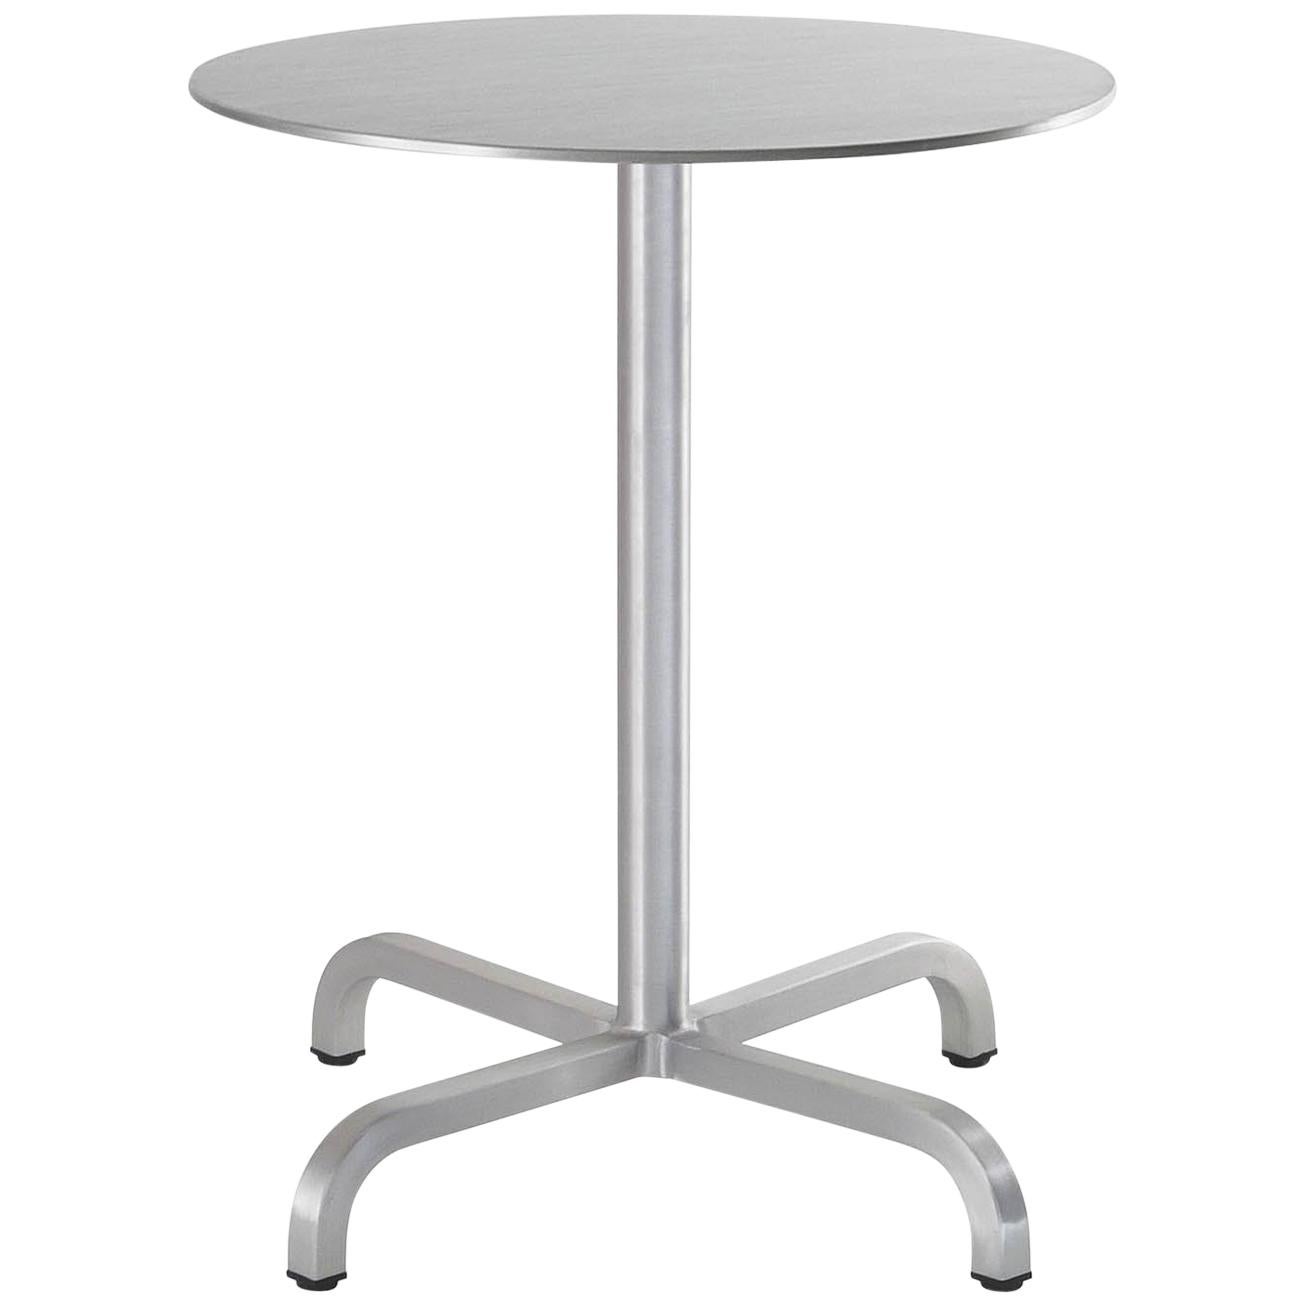 Emeco 20-06 Small Round Café Table in Brushed Aluminium by Norman Foster